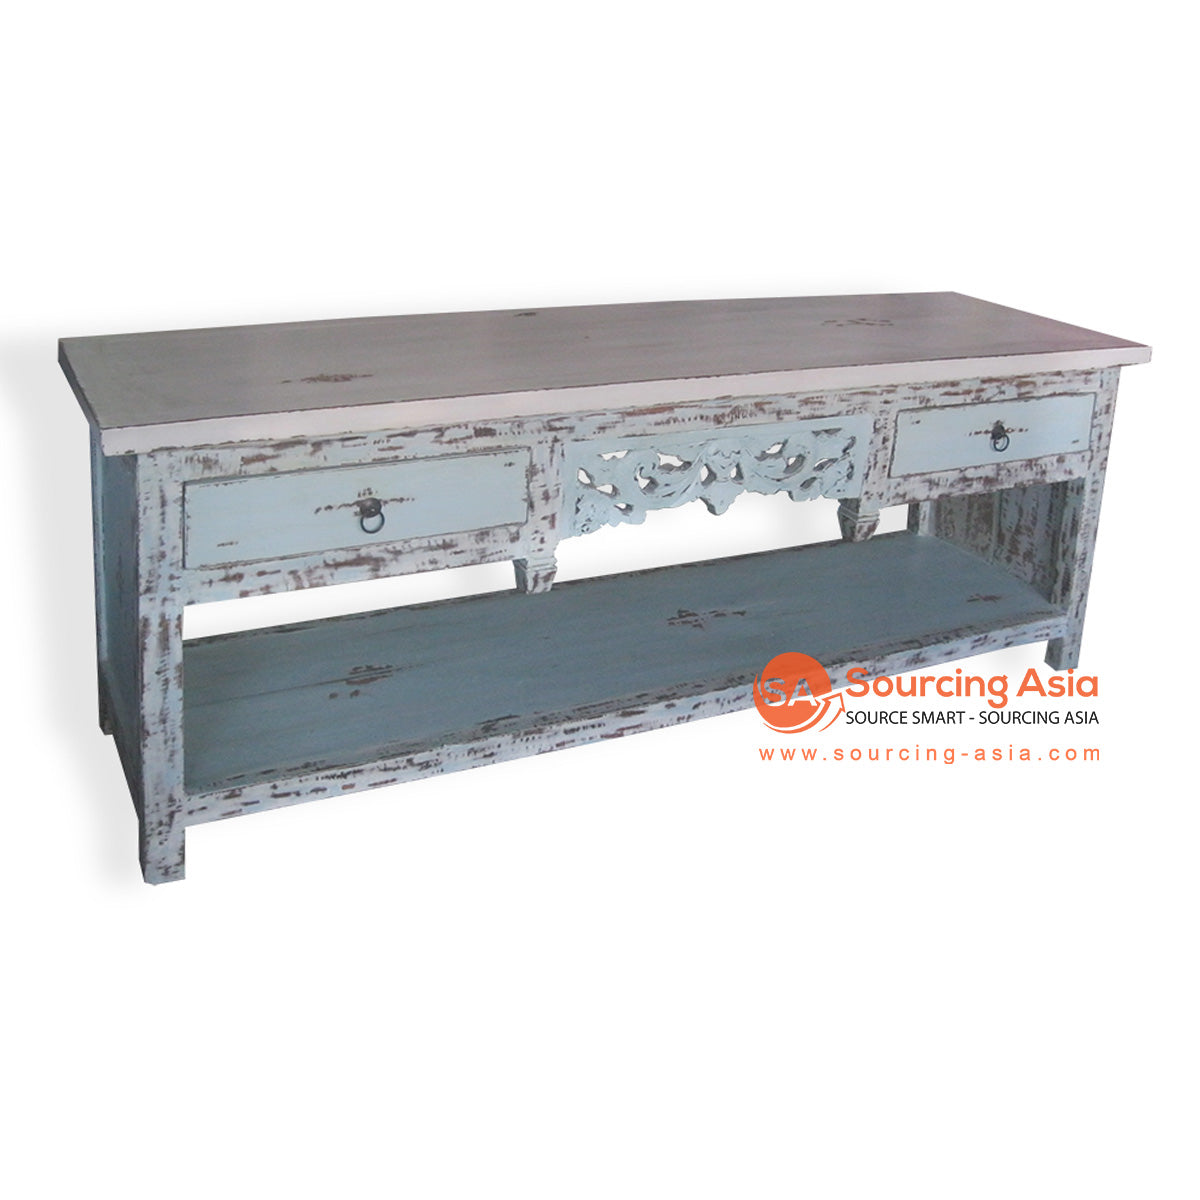 SIX017 TURQUOISE RECYCLED TEAK WOOD TWO DRAWERS AND ONE OPEN SHELF CARVED CONSOLE